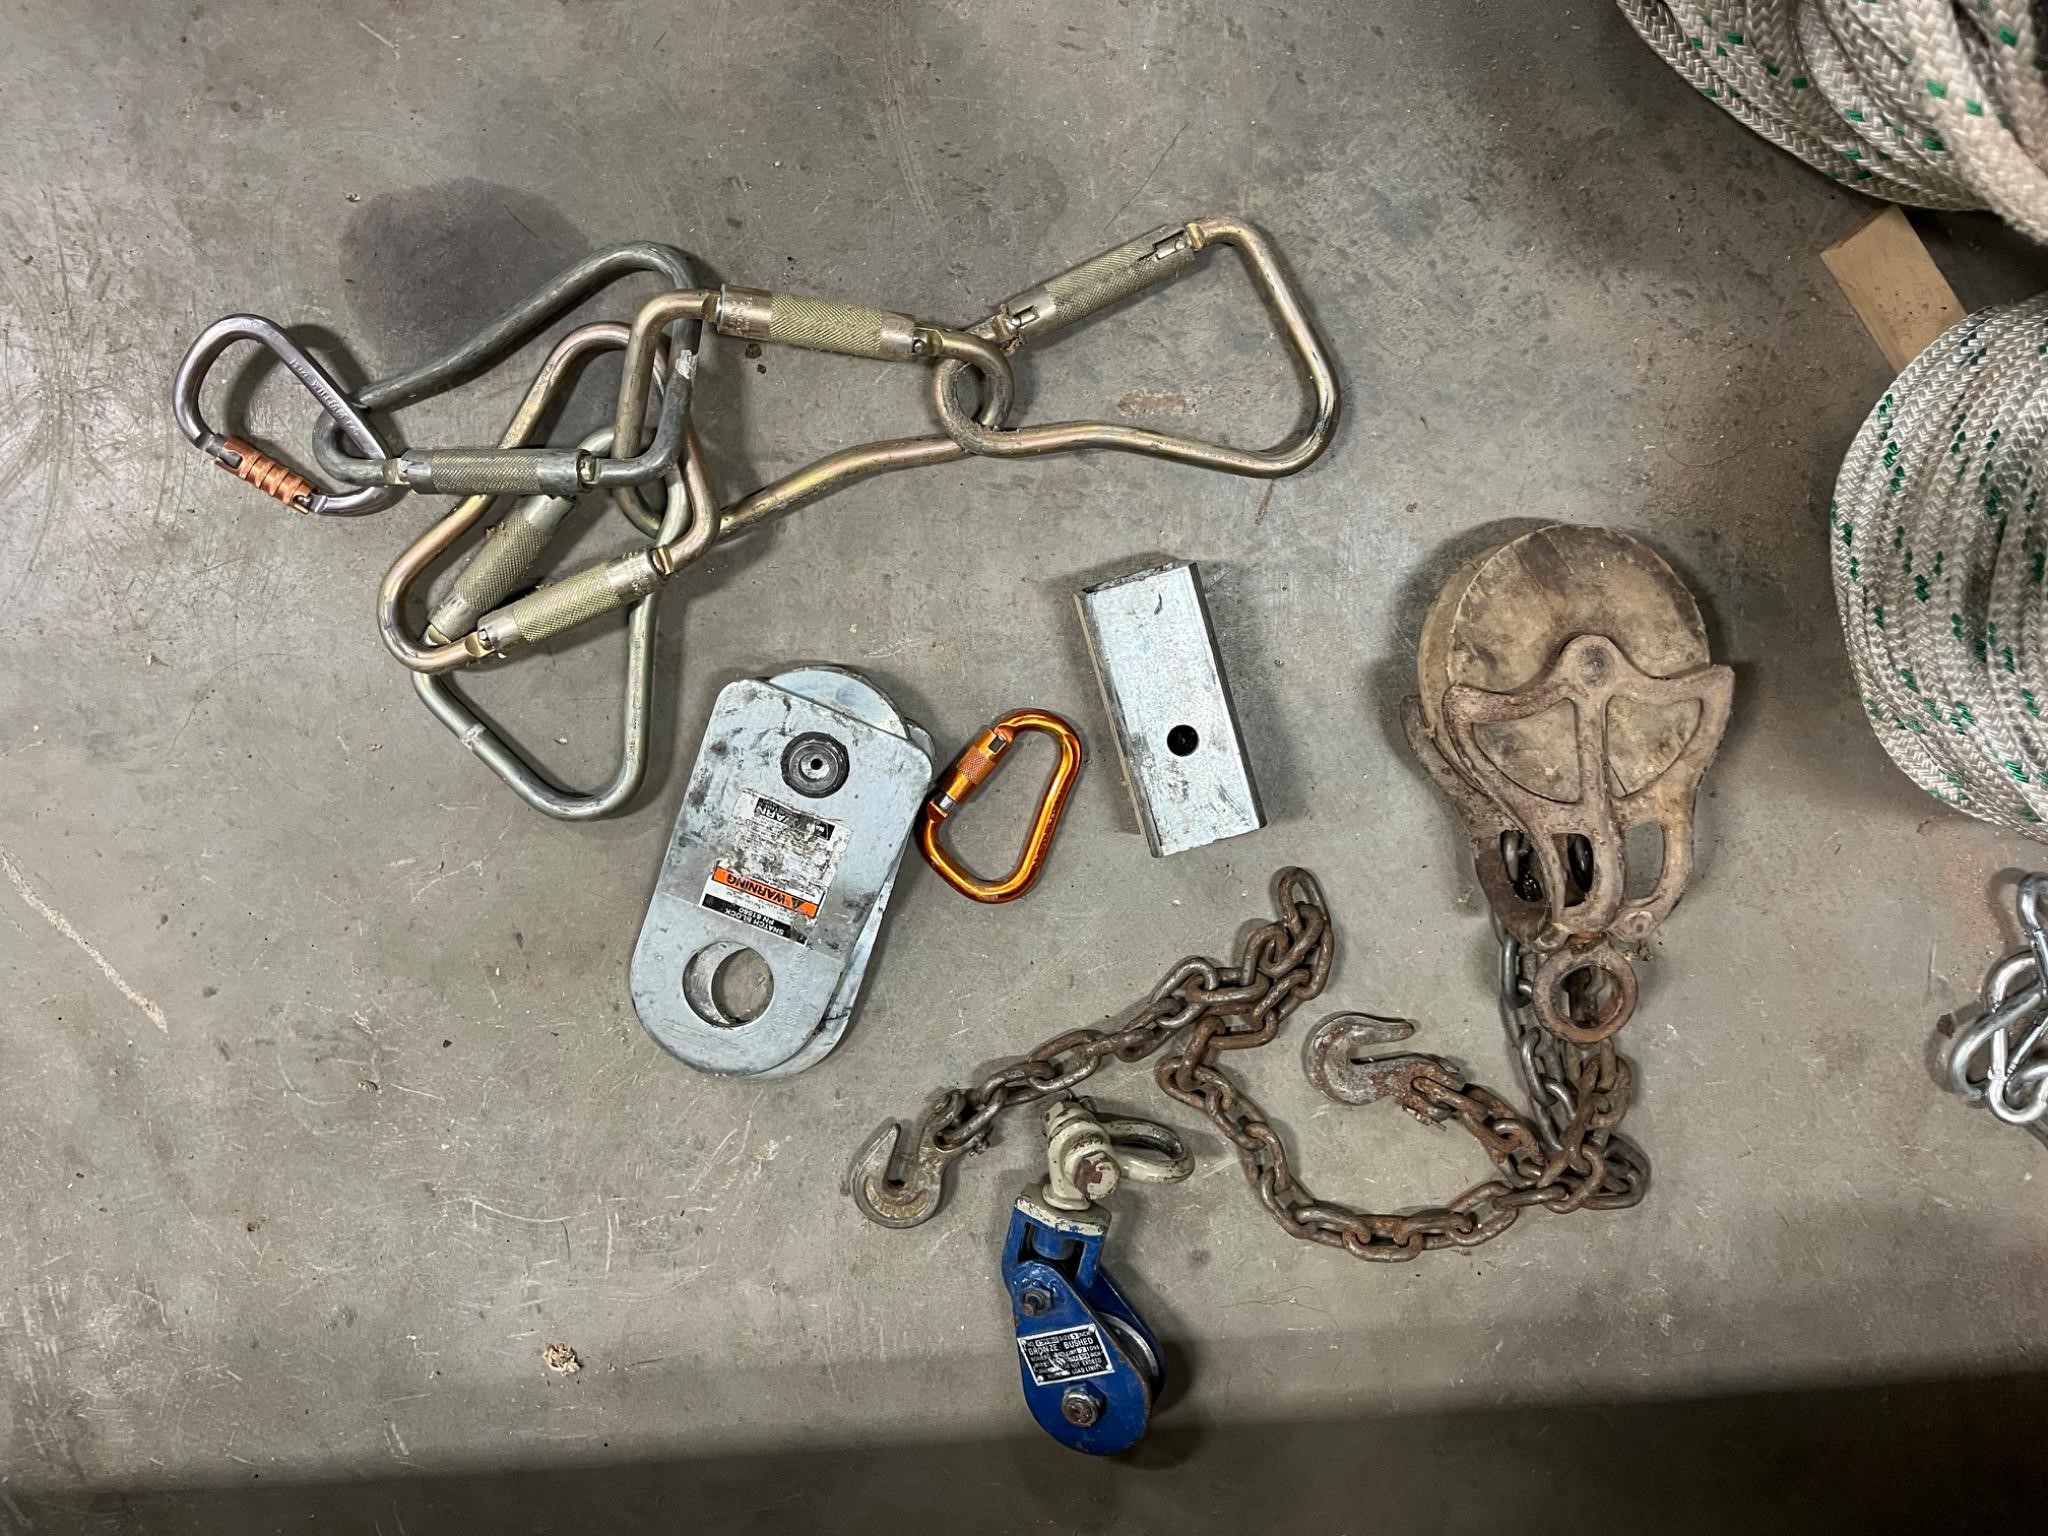 Pulley System/ Carabiners ETC All Pictured